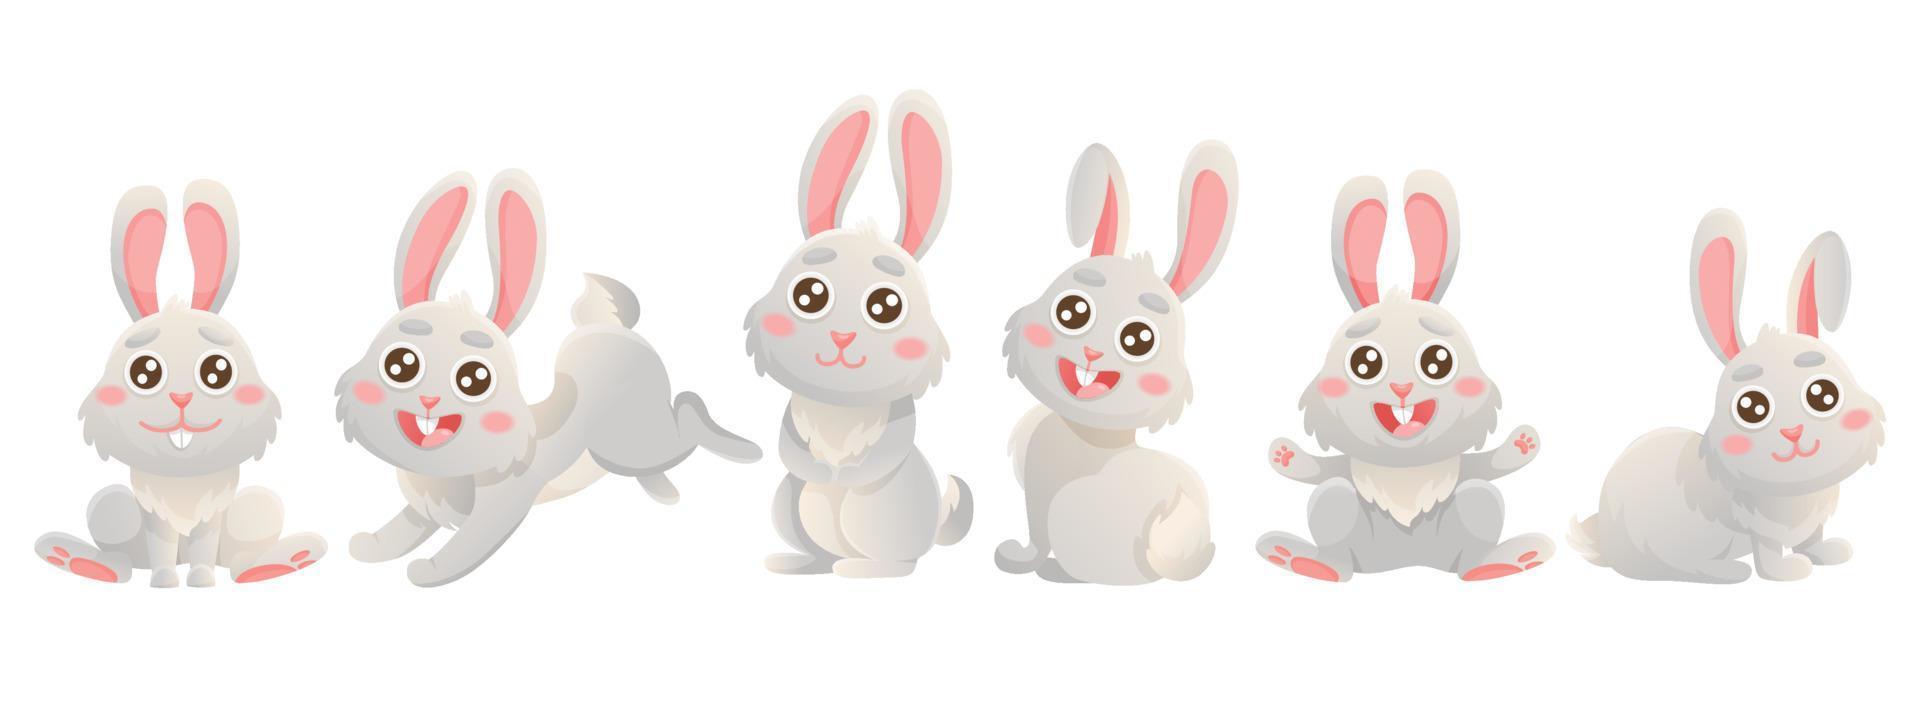 Cartoon big set of cute bunnies. Banner with vector illustrations. Vector grey bunny is sitting, jumping in cute poses